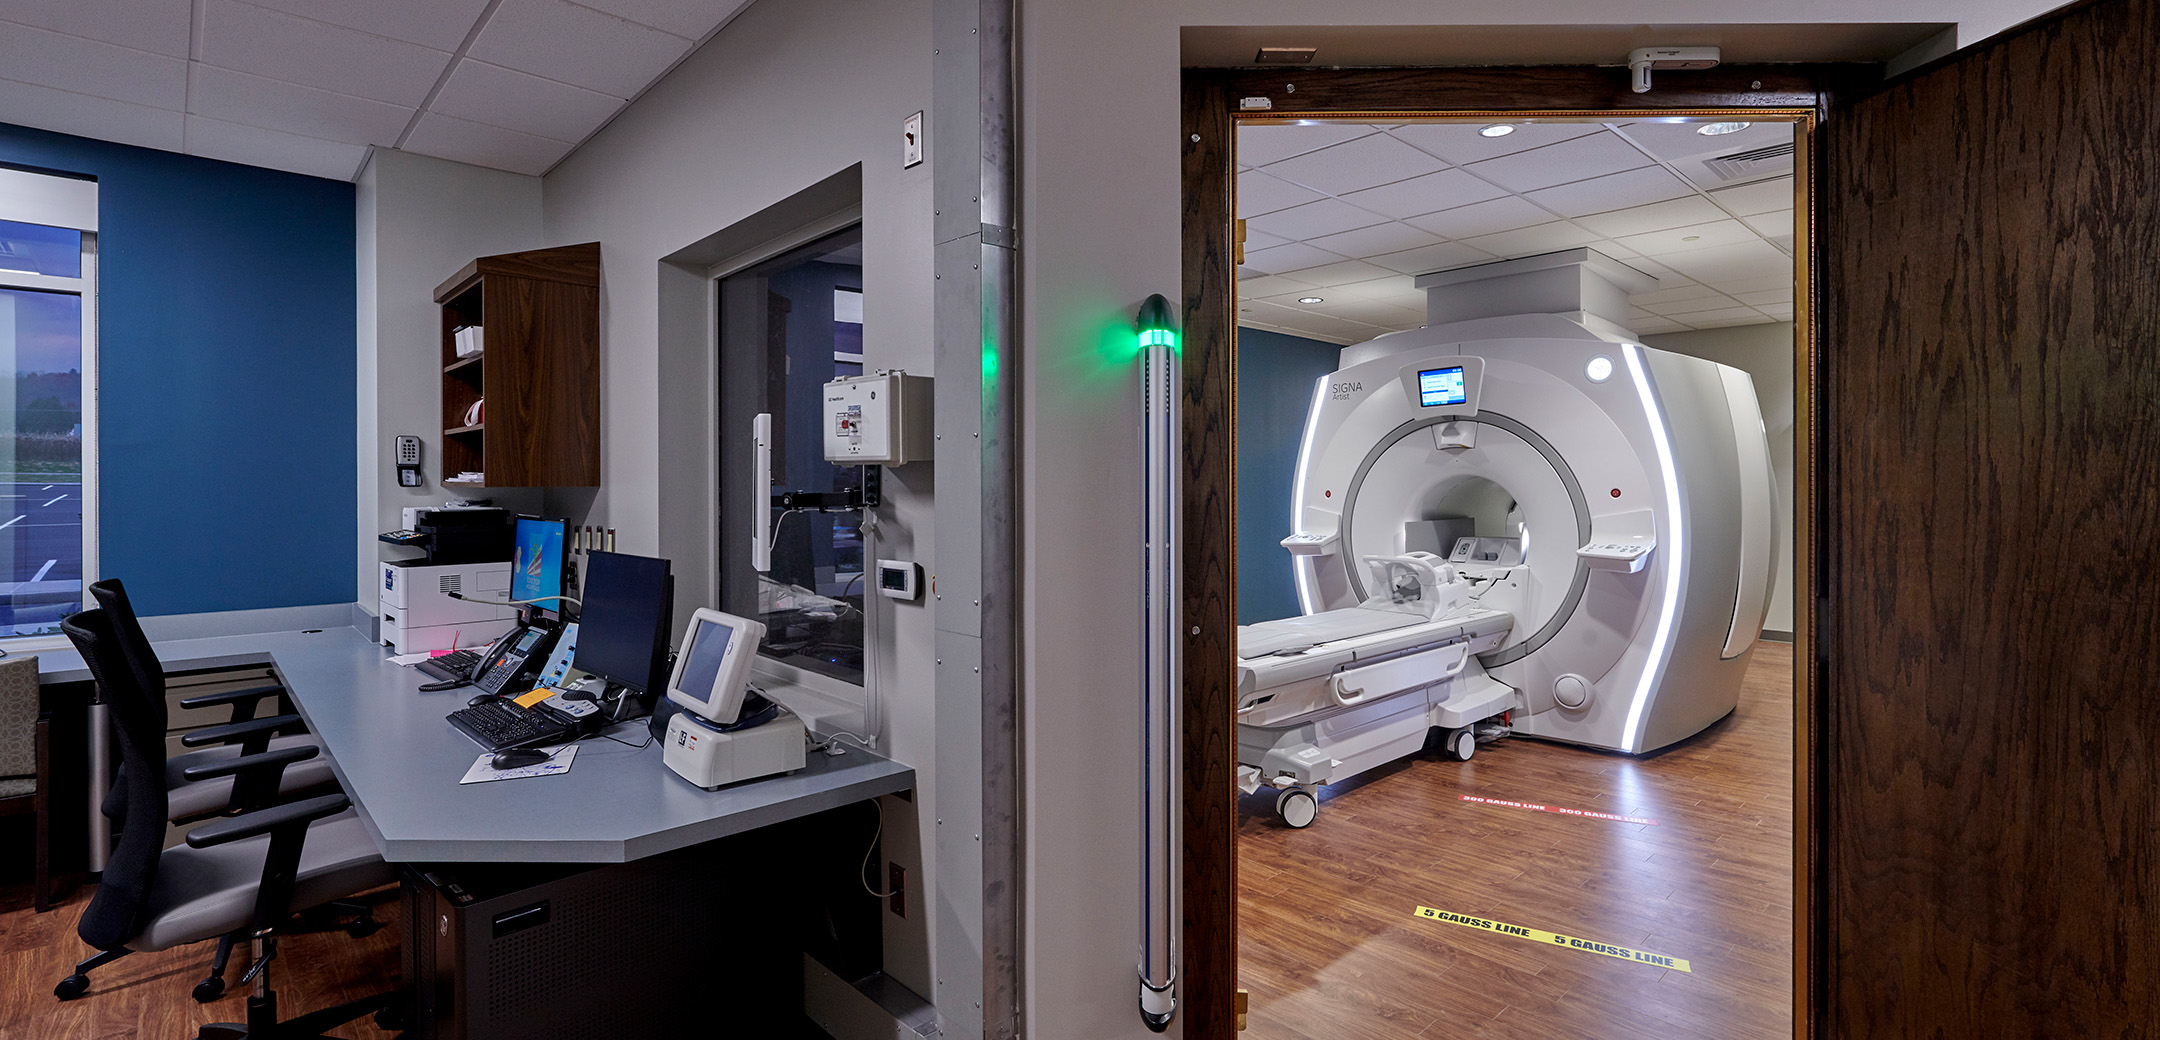 An interior view of St, Luke's Carbon County hospital showcasing the MRI room and outside monitoring and control room.